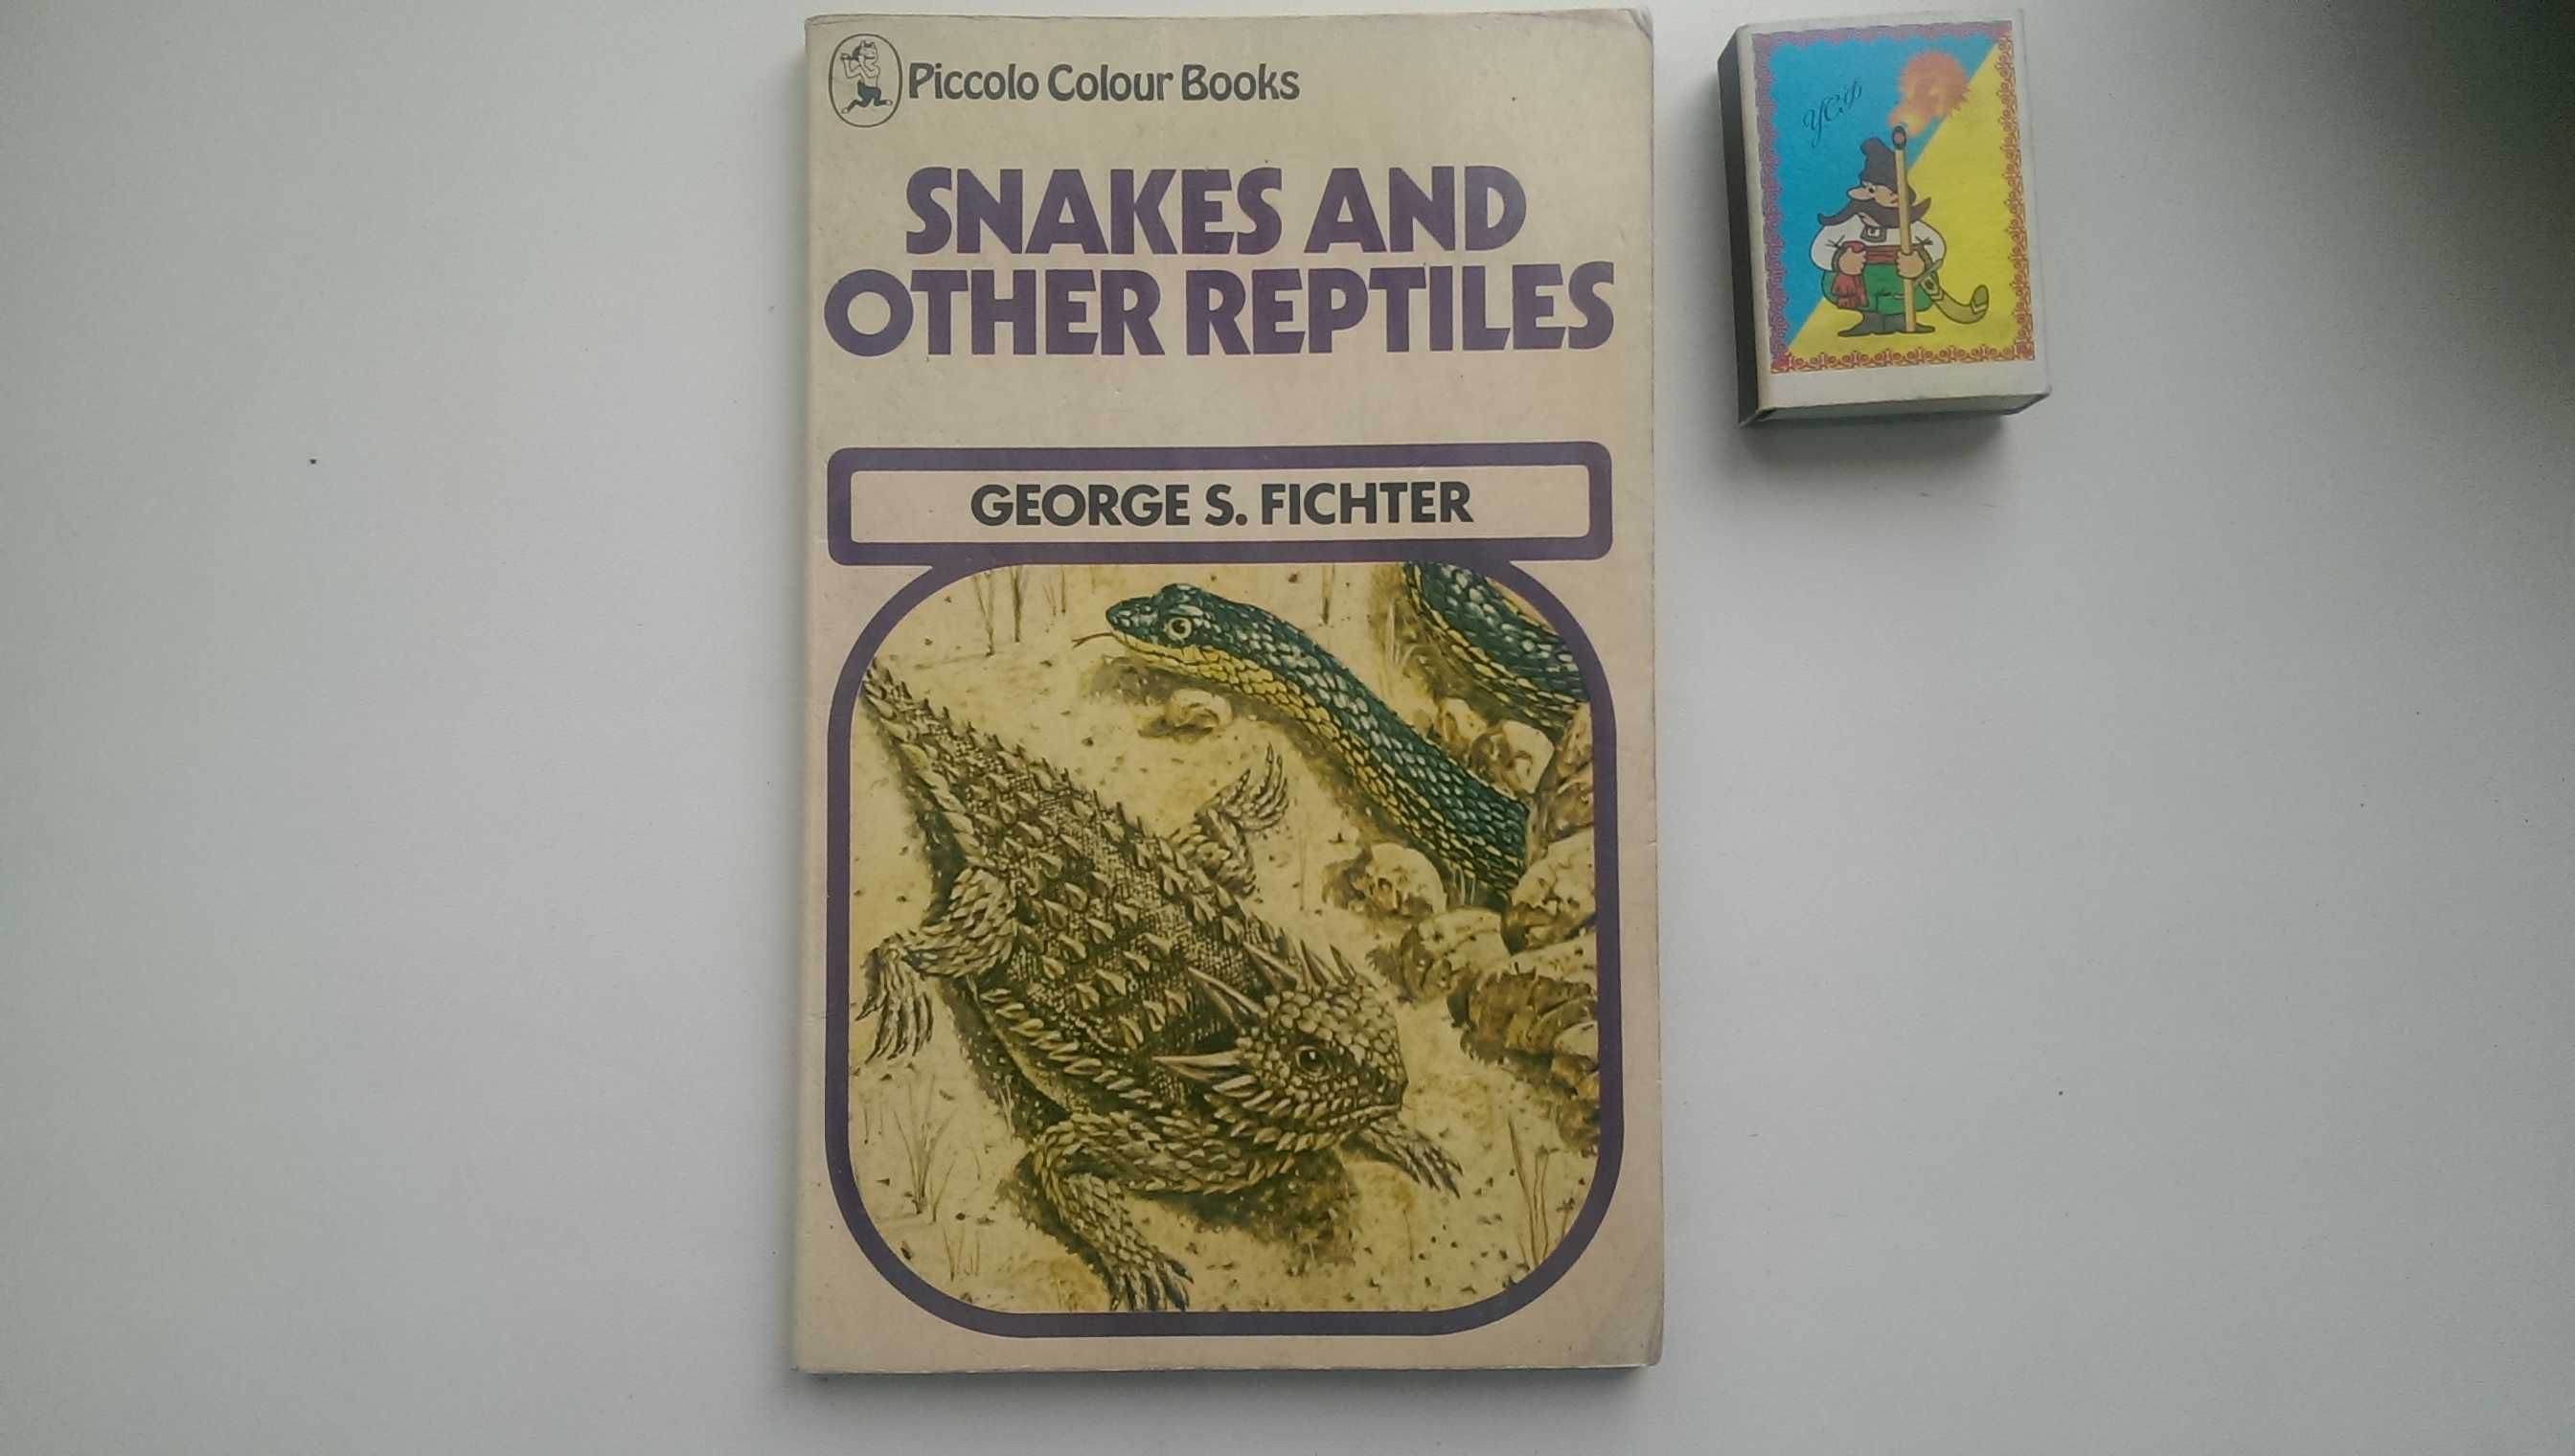 Snakes and other reptiles